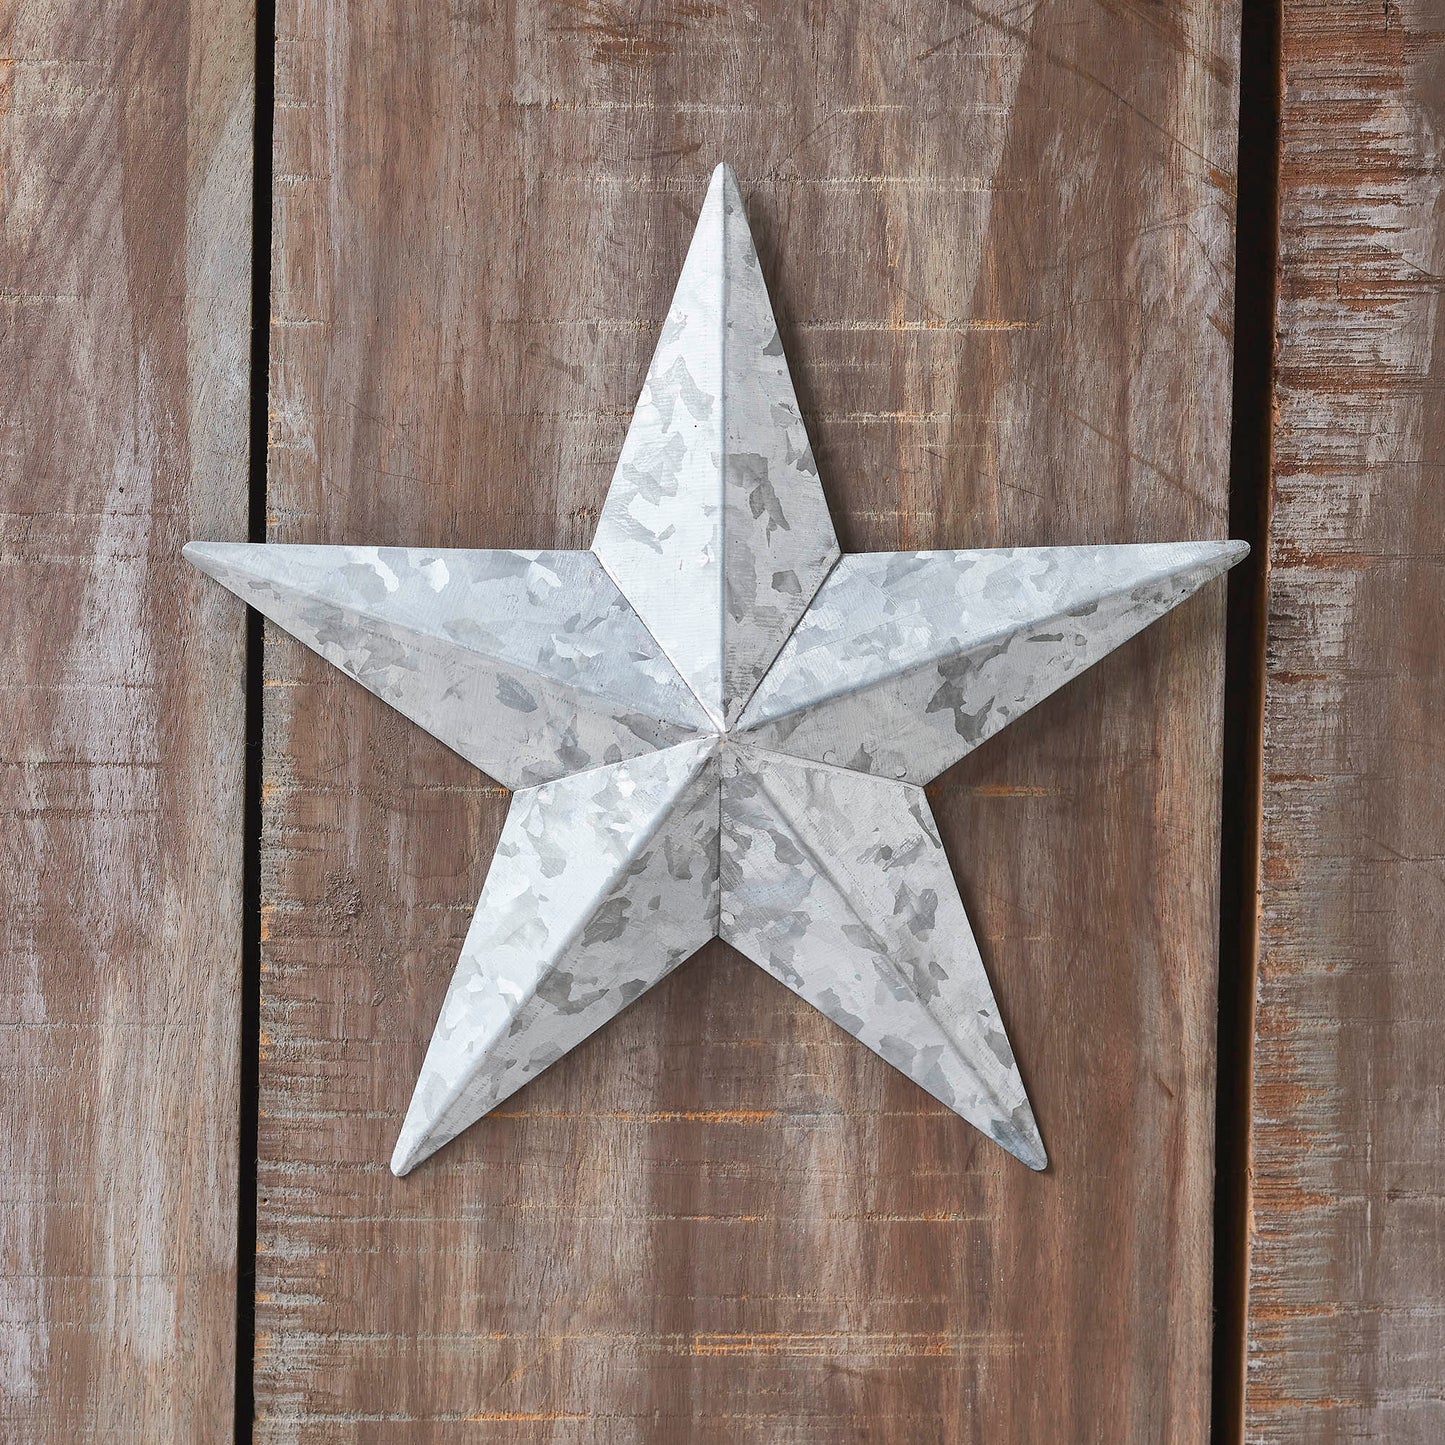 VHC Brands Patriotic Faceted Metal Star Galvanized Wall Hanging 8x8, Independence Day Decor, American Star Design, Distressed Appearance Metal Wall Hanging,  Star Shape, Country, Metal Grey